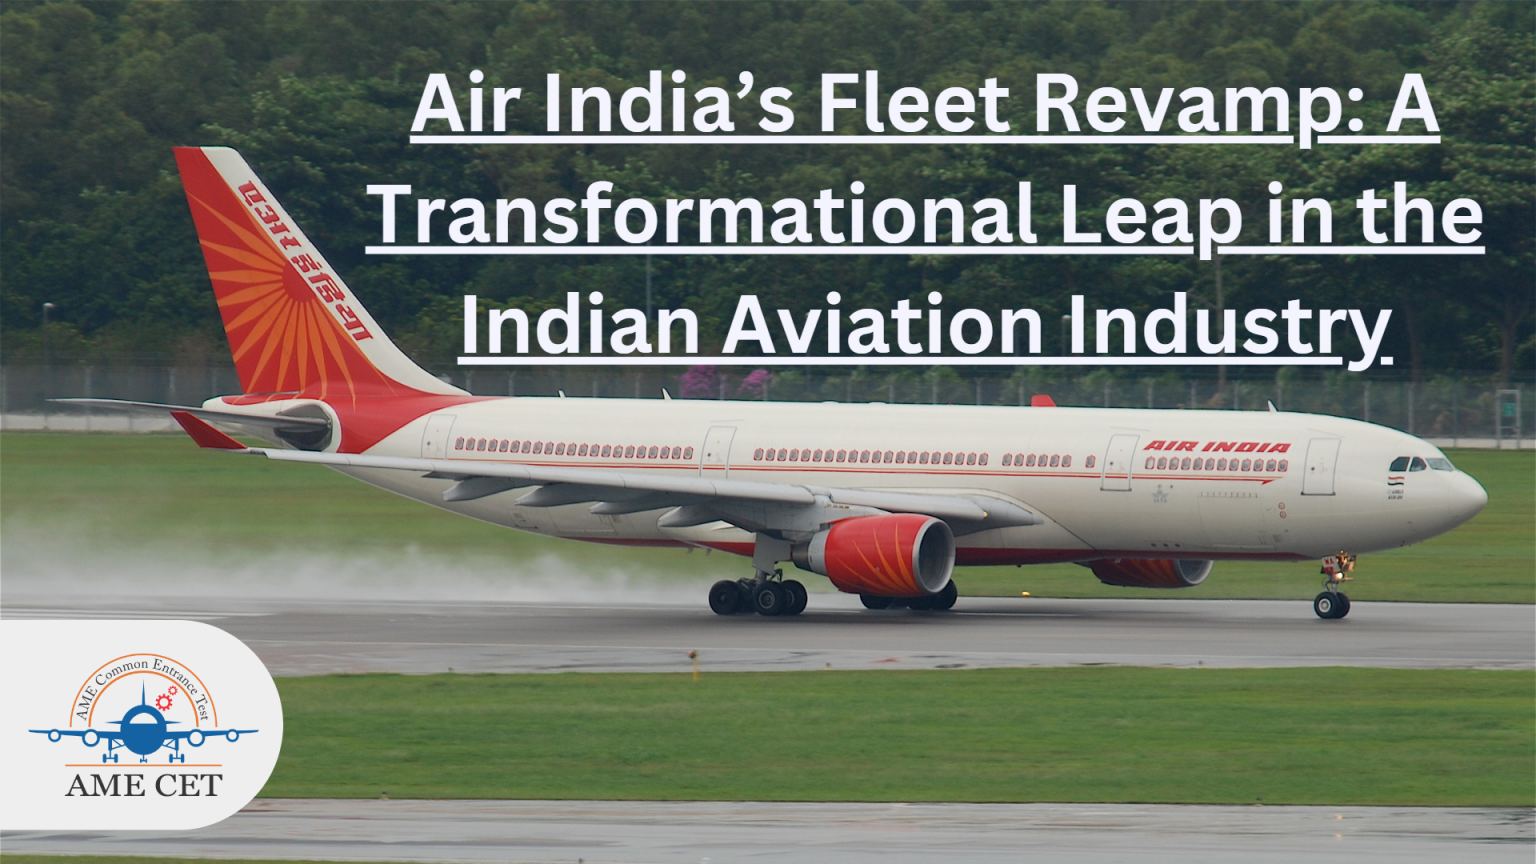 Air India Is Upgrading Its Fleet Of Airplanes Which Is A Big Change In